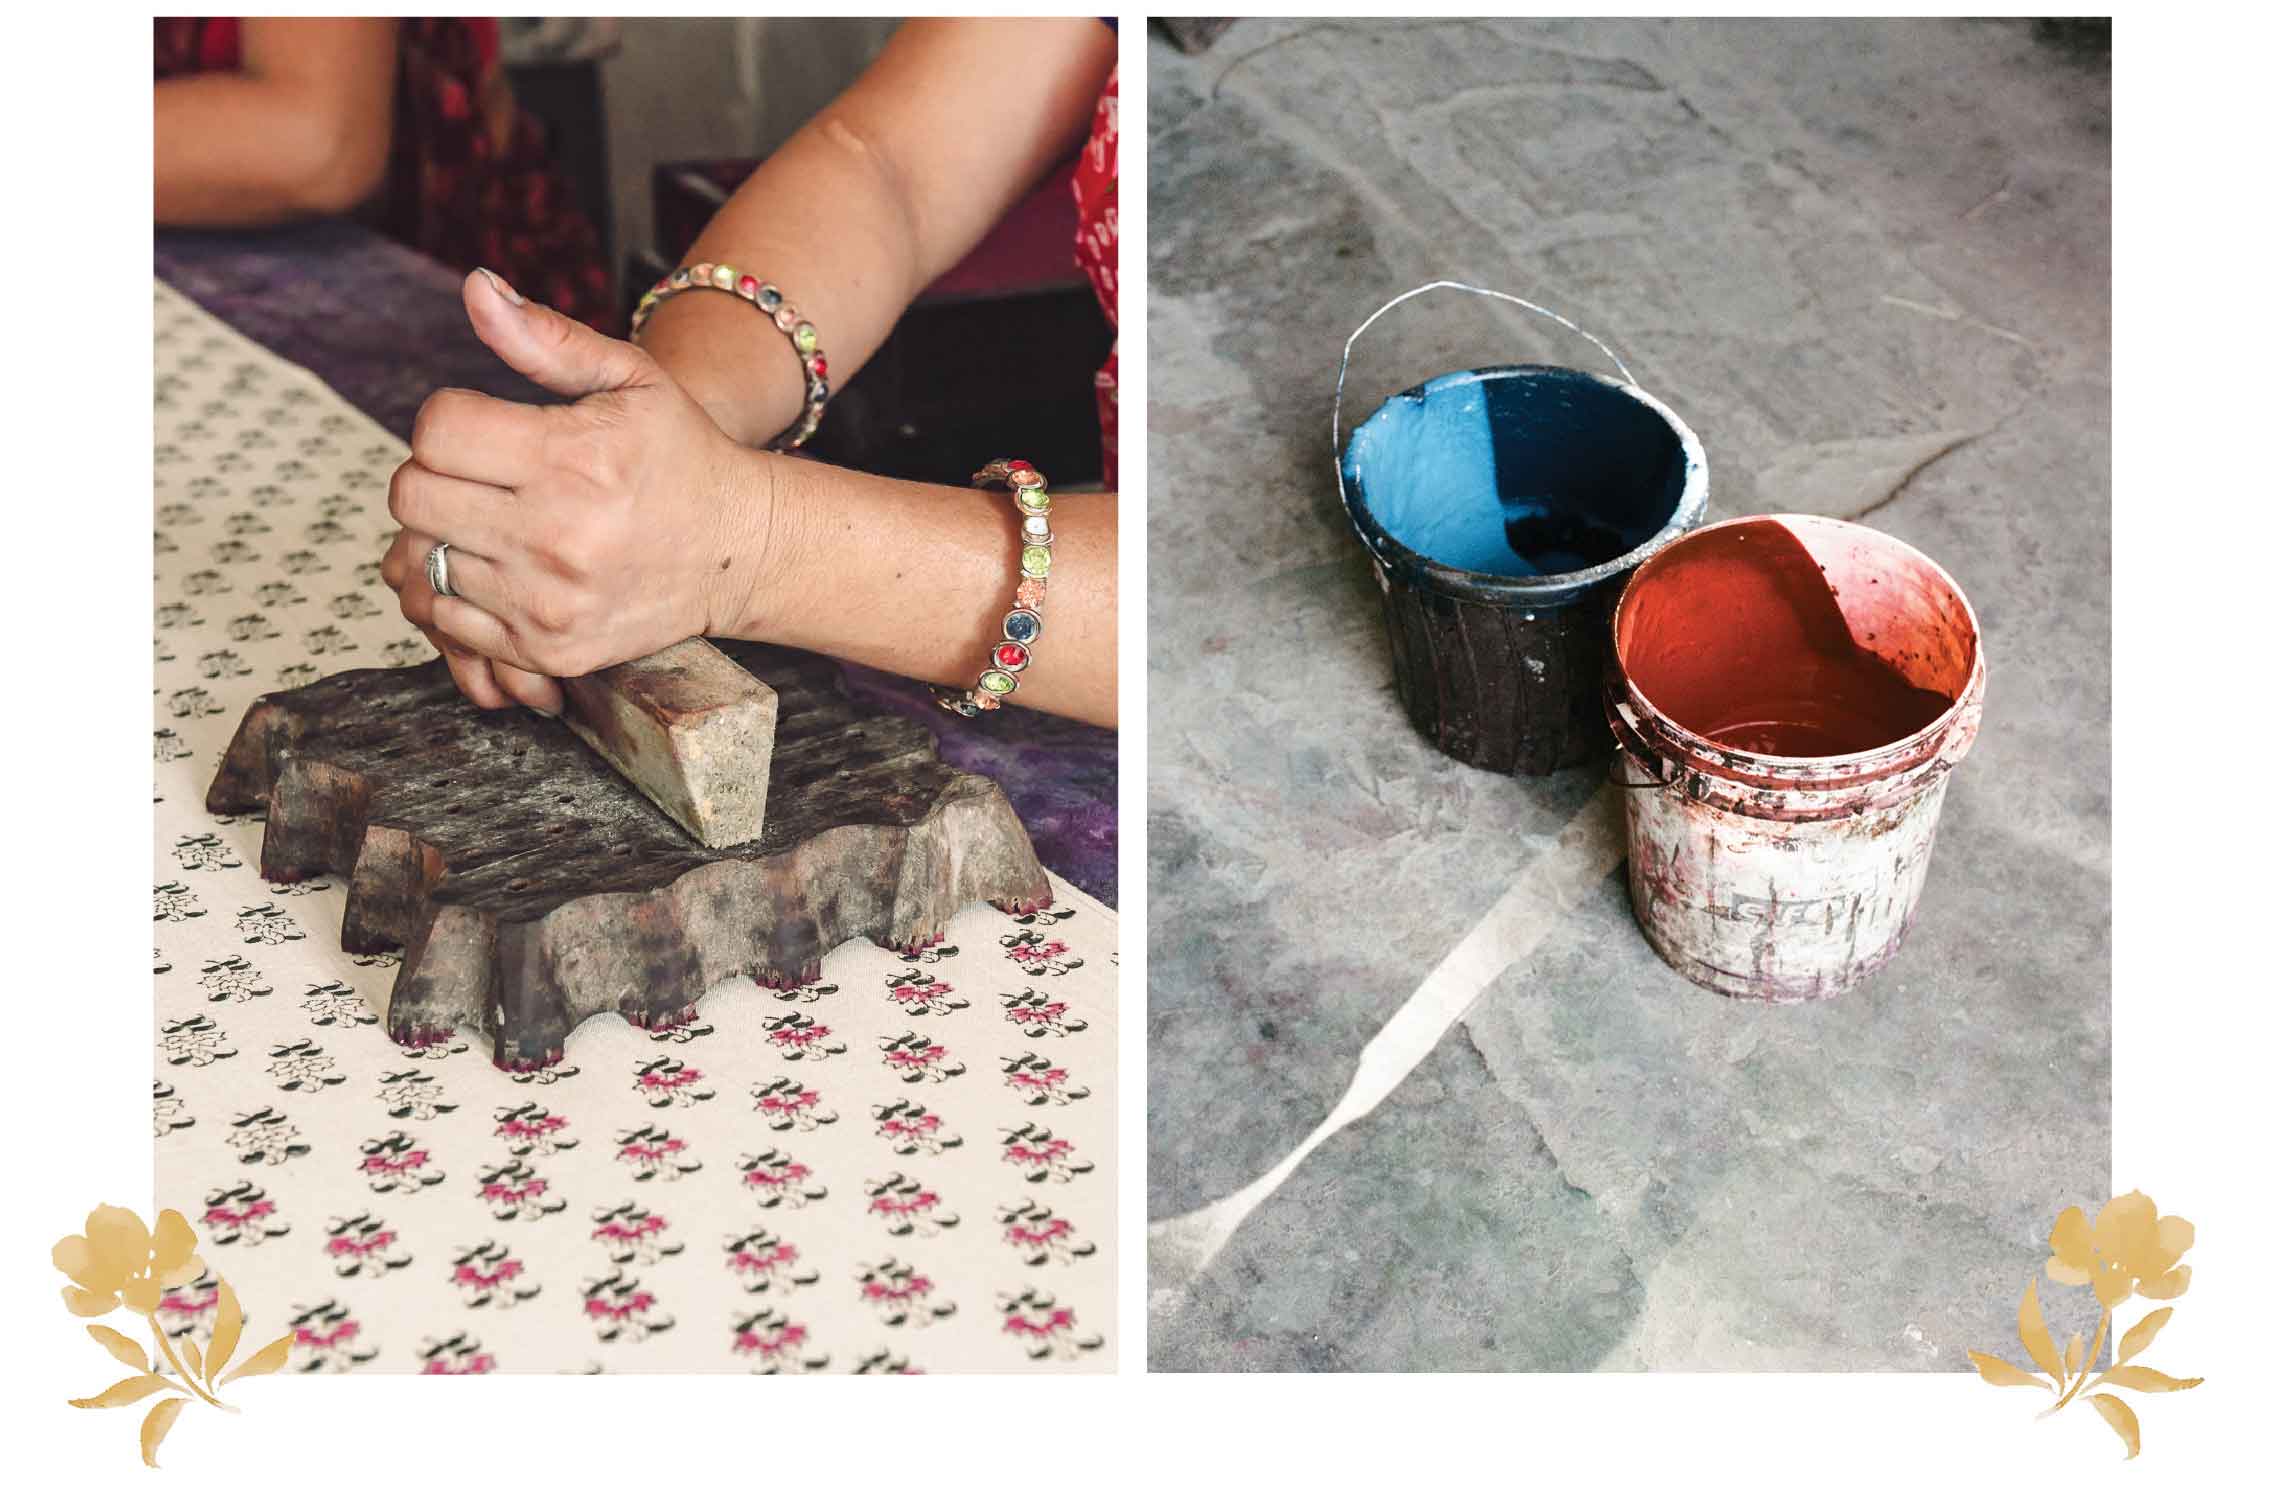 Left, a close up of hands block printing. Right, buckets filled with paint used to block print